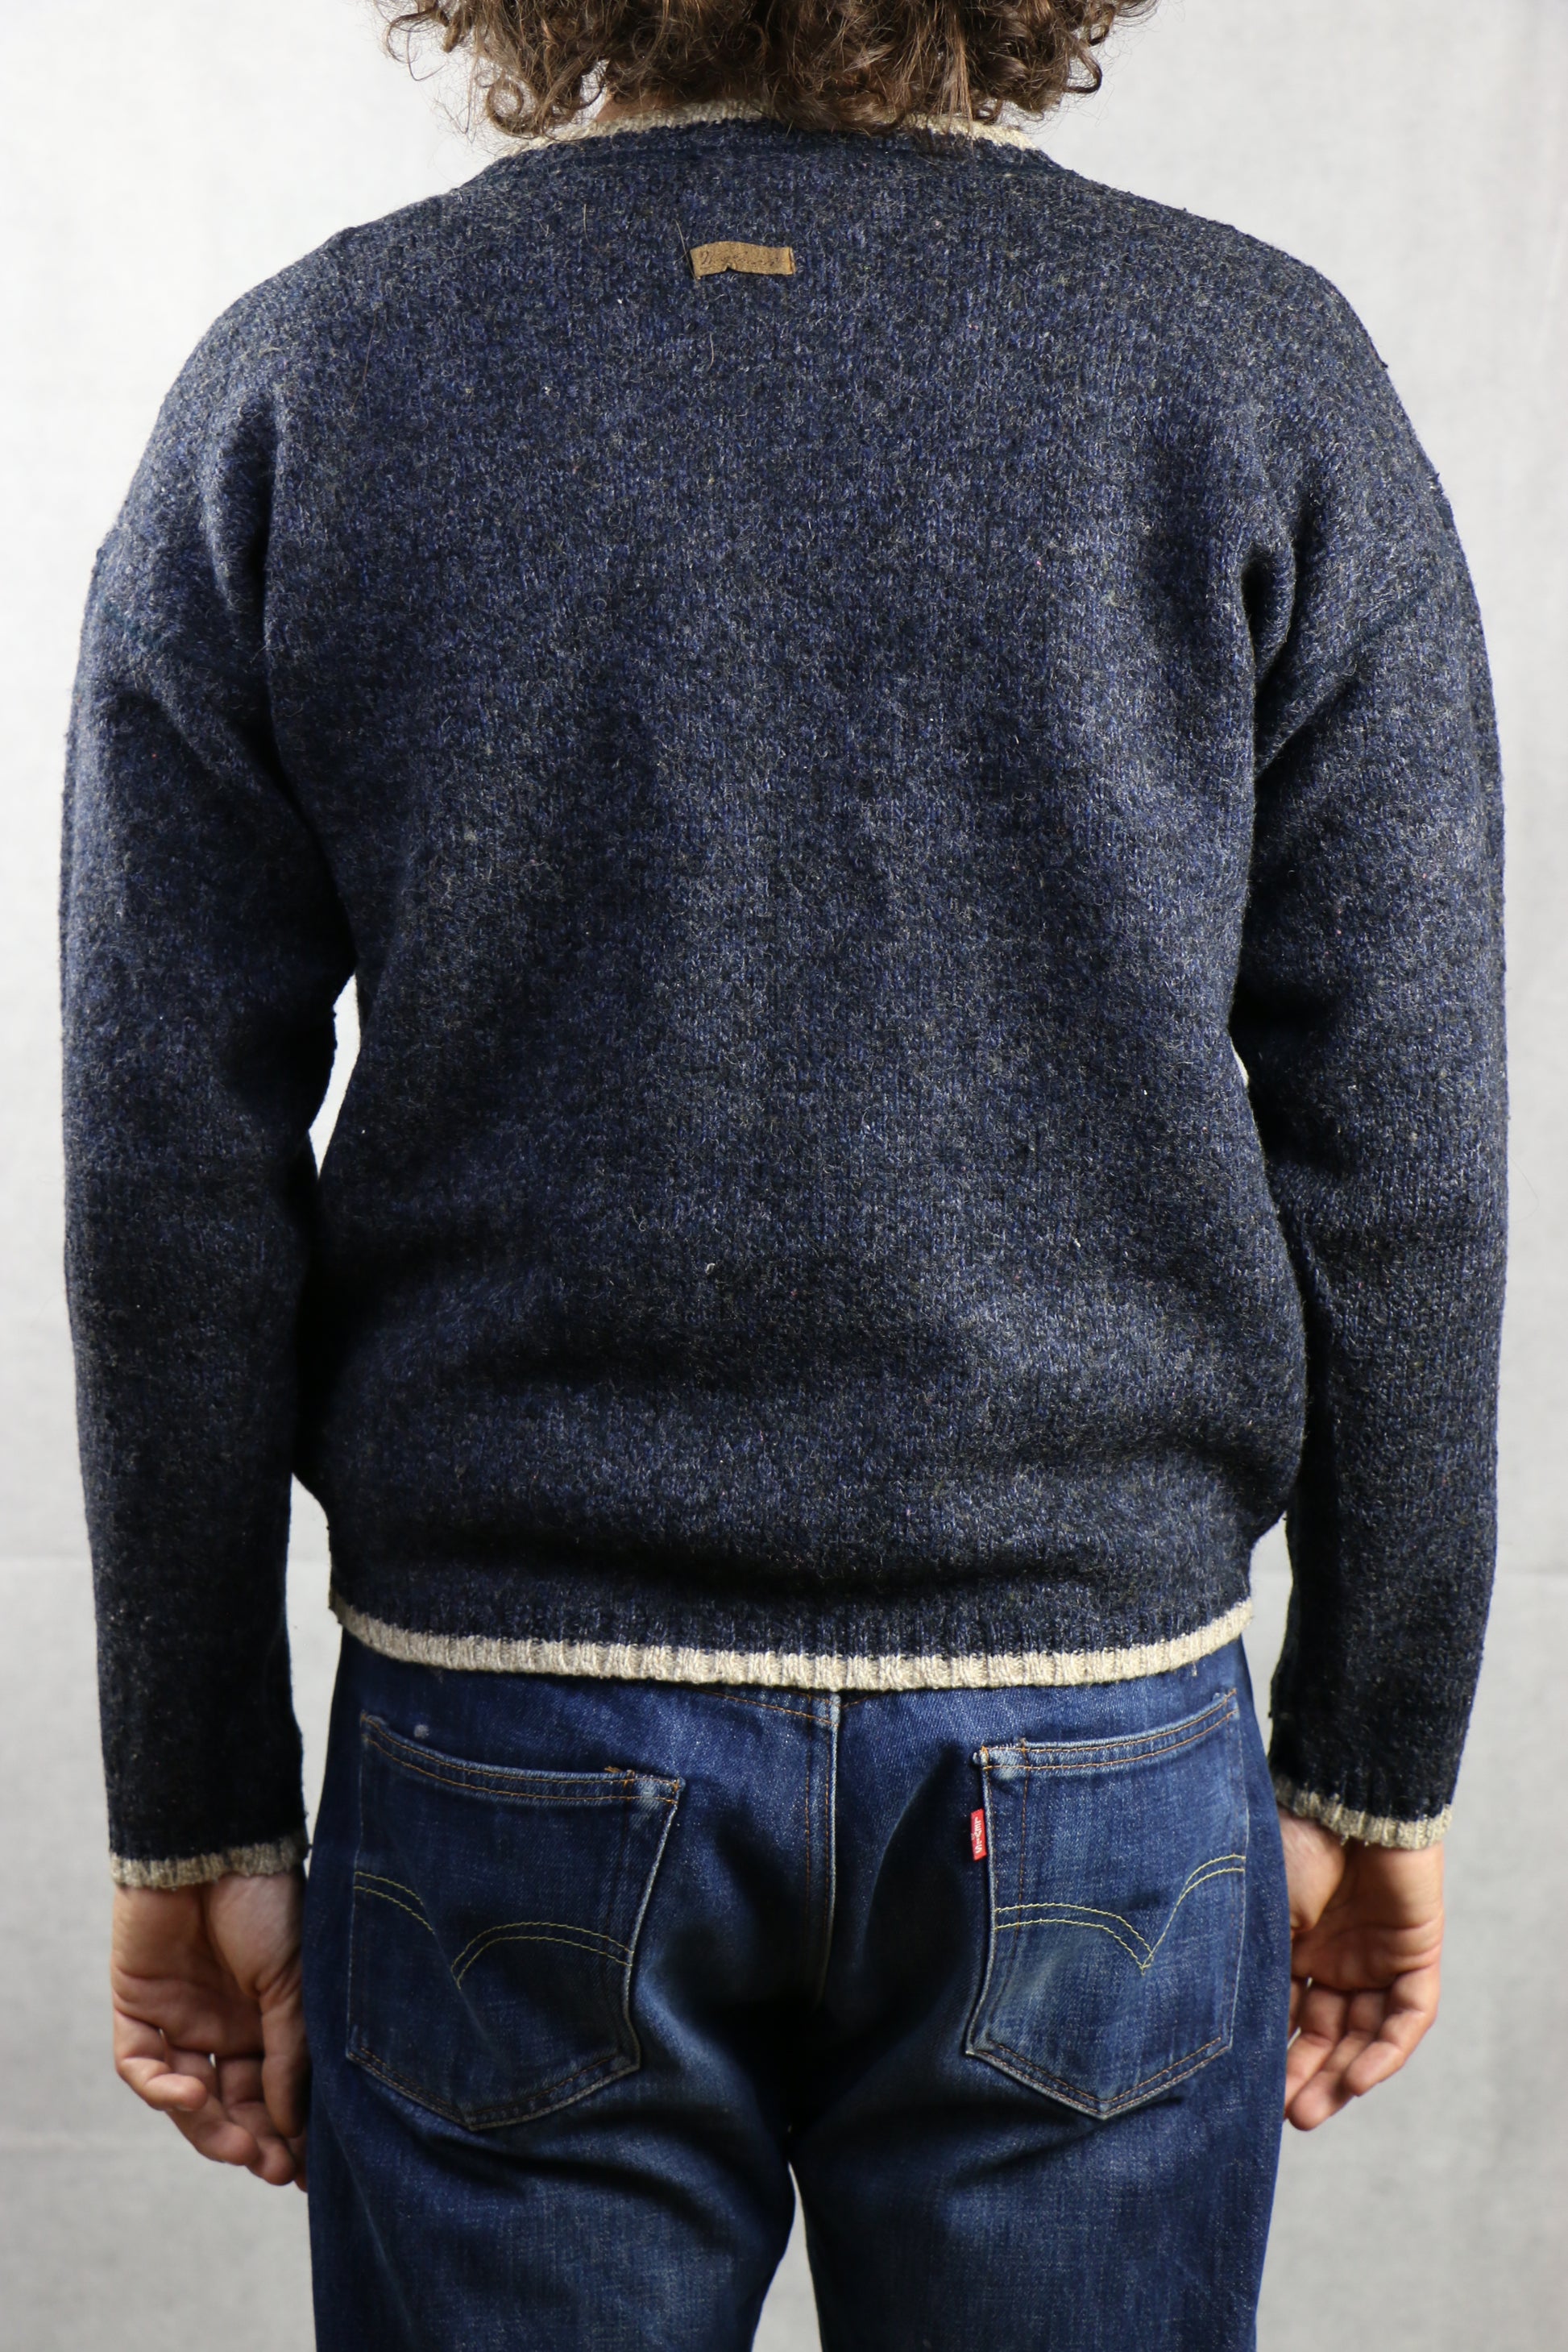 Woolrich Navy Sweater - vintage clothing clochard92.com